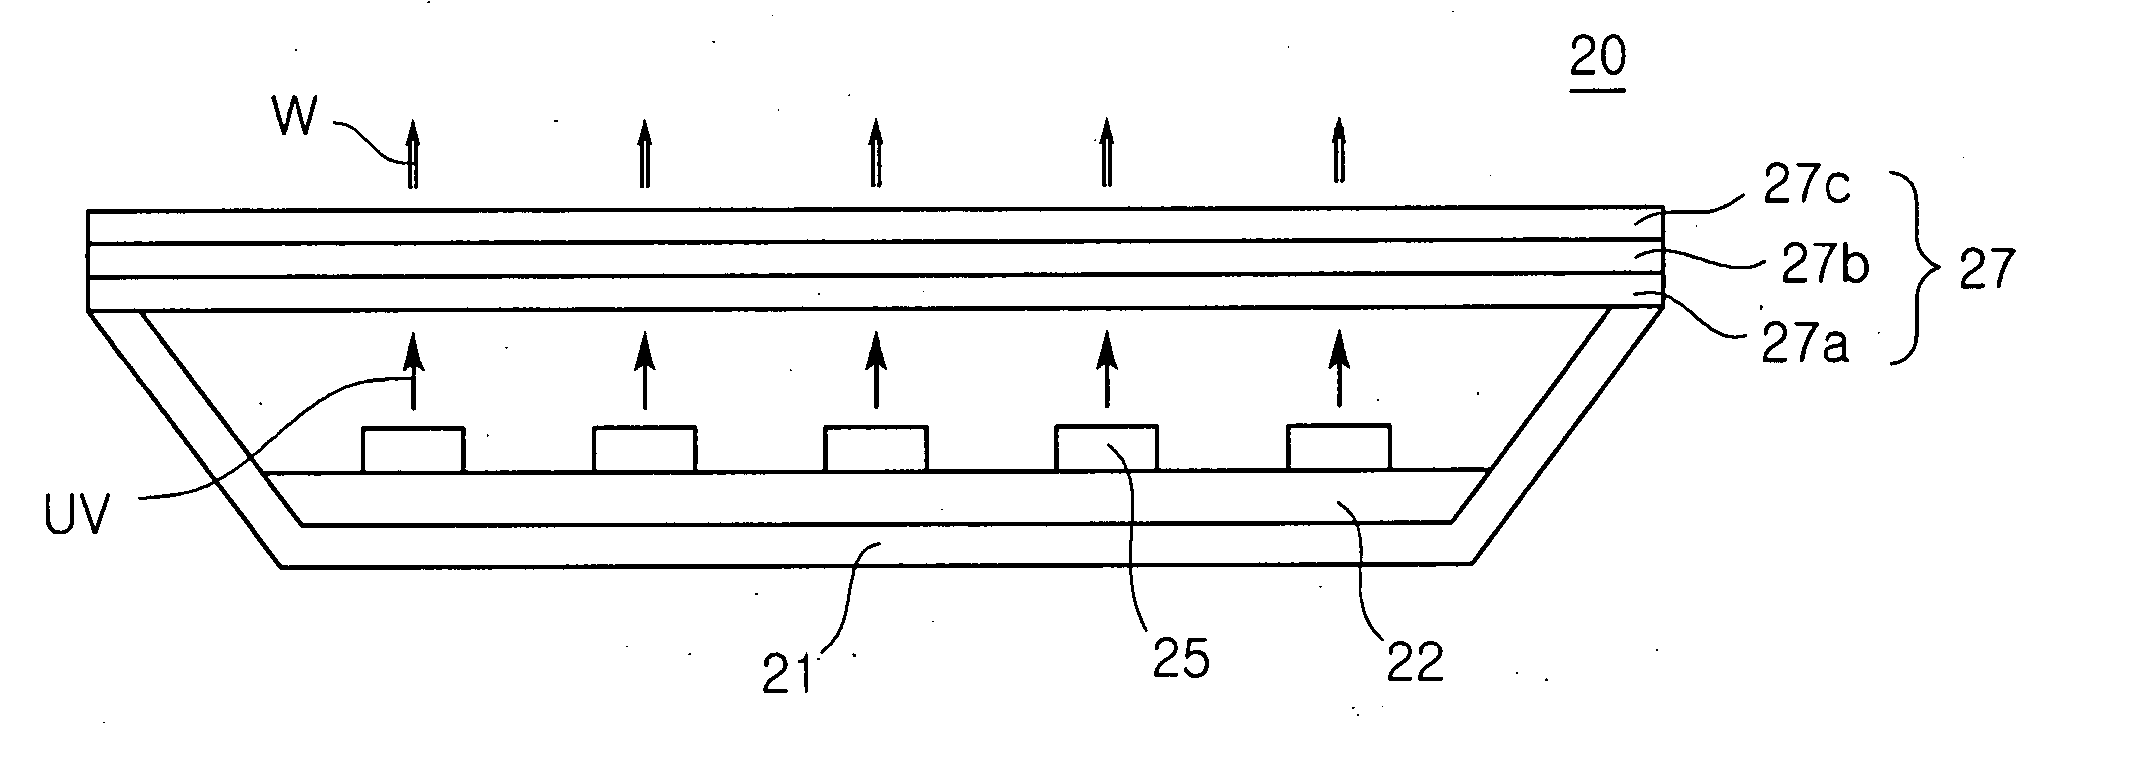 Surface light source device using light emitting diodes